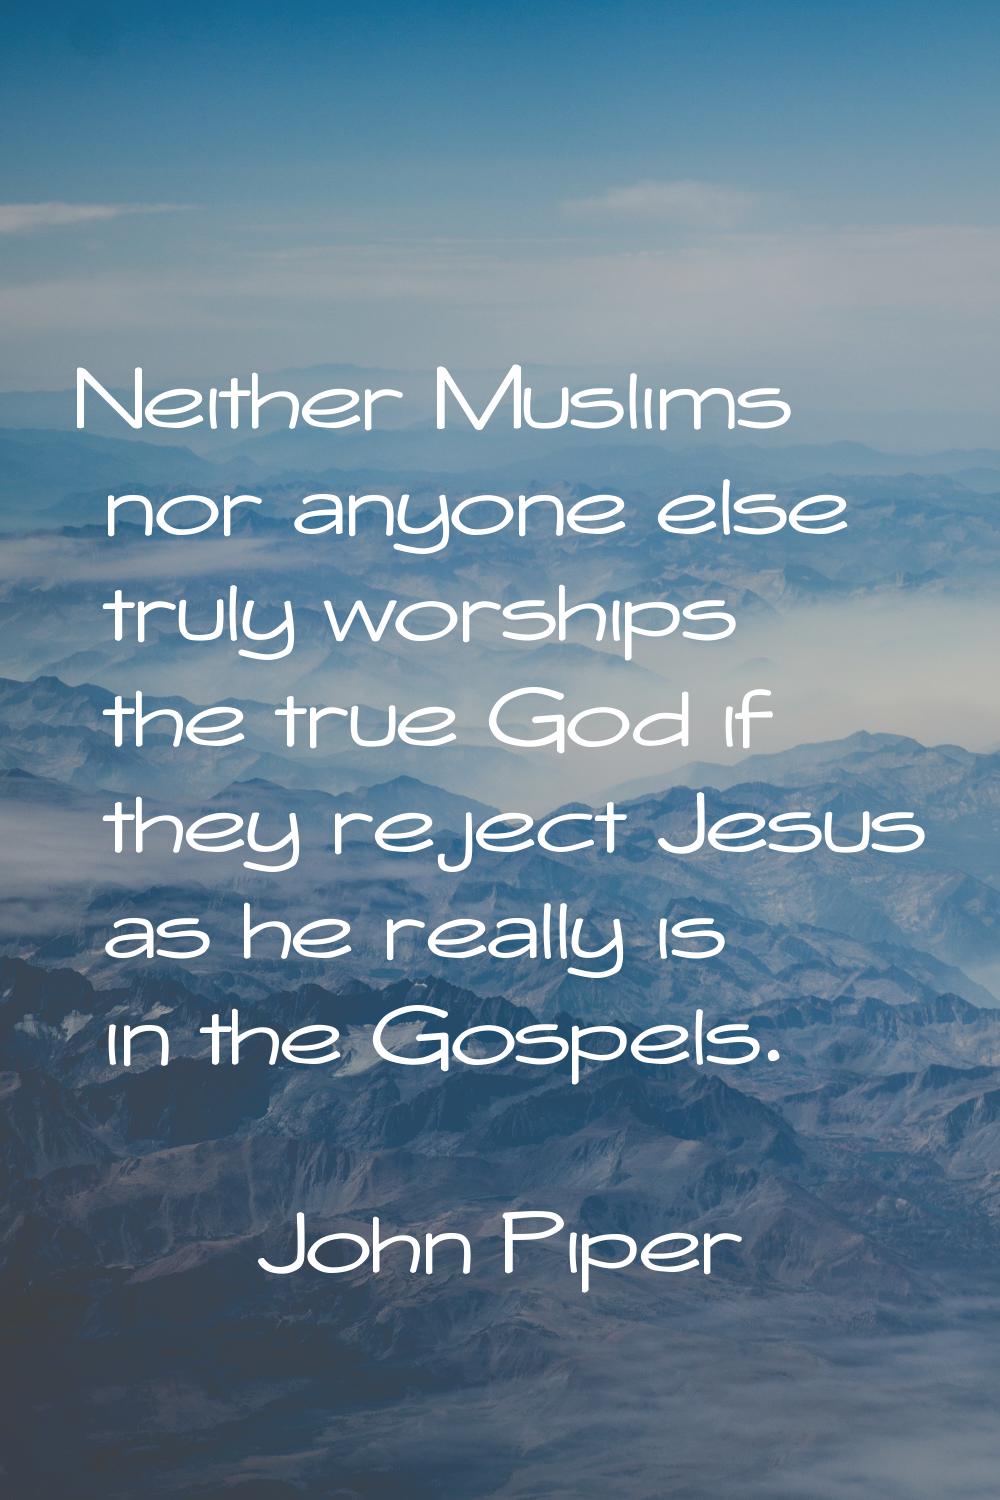 Neither Muslims nor anyone else truly worships the true God if they reject Jesus as he really is in